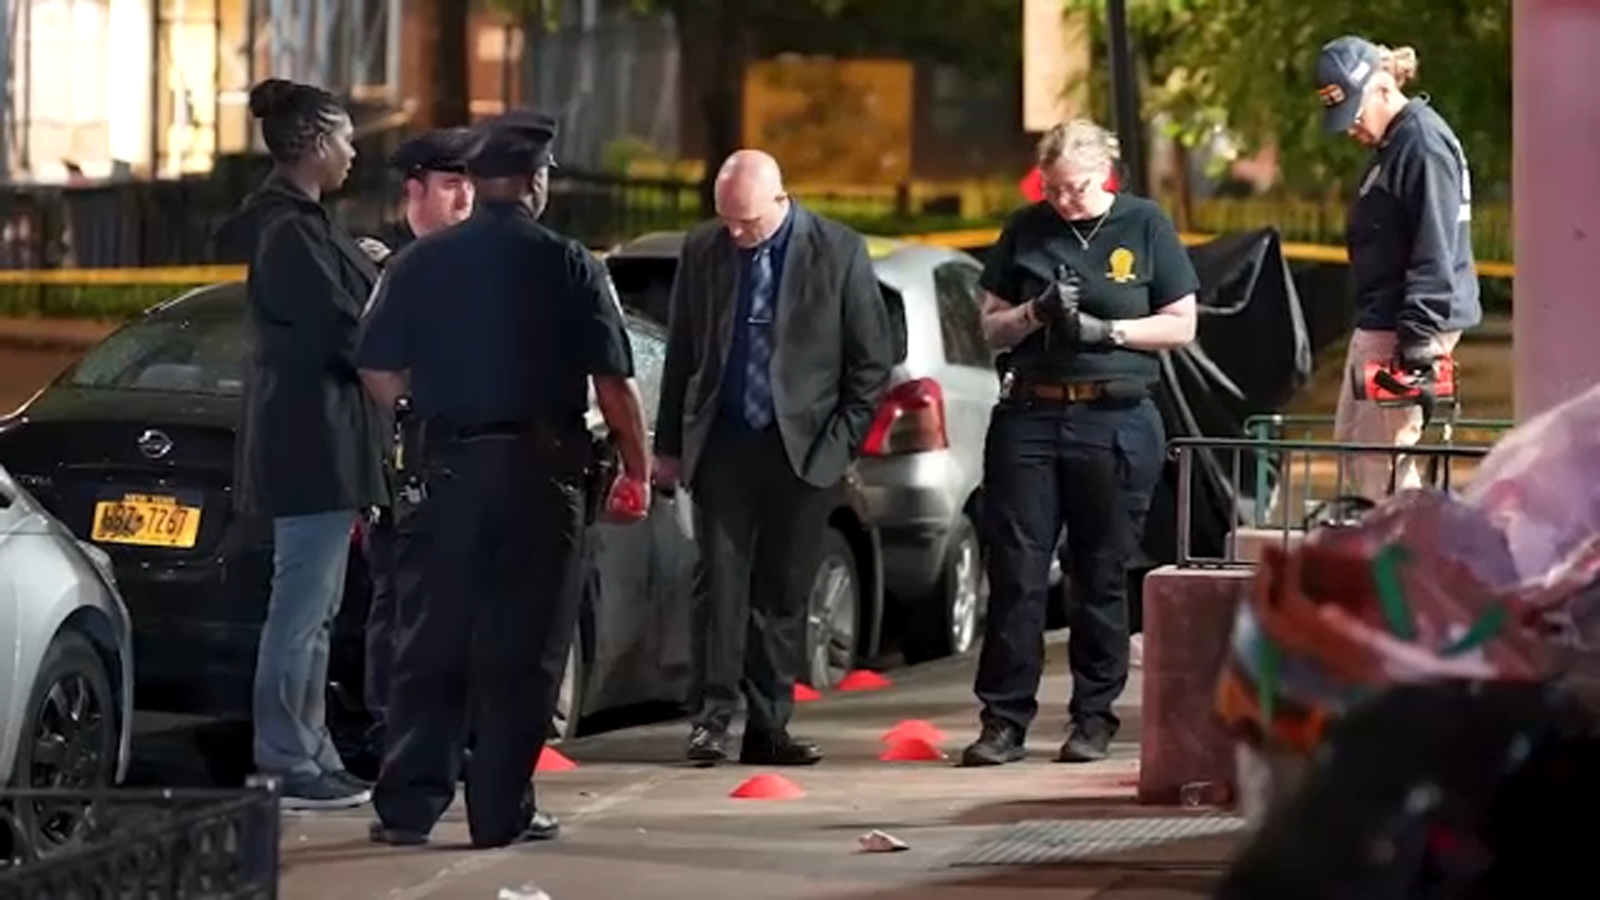 Brooklyn shooting: A man is dead and another is injured after both were shot in Brownsville [Video]